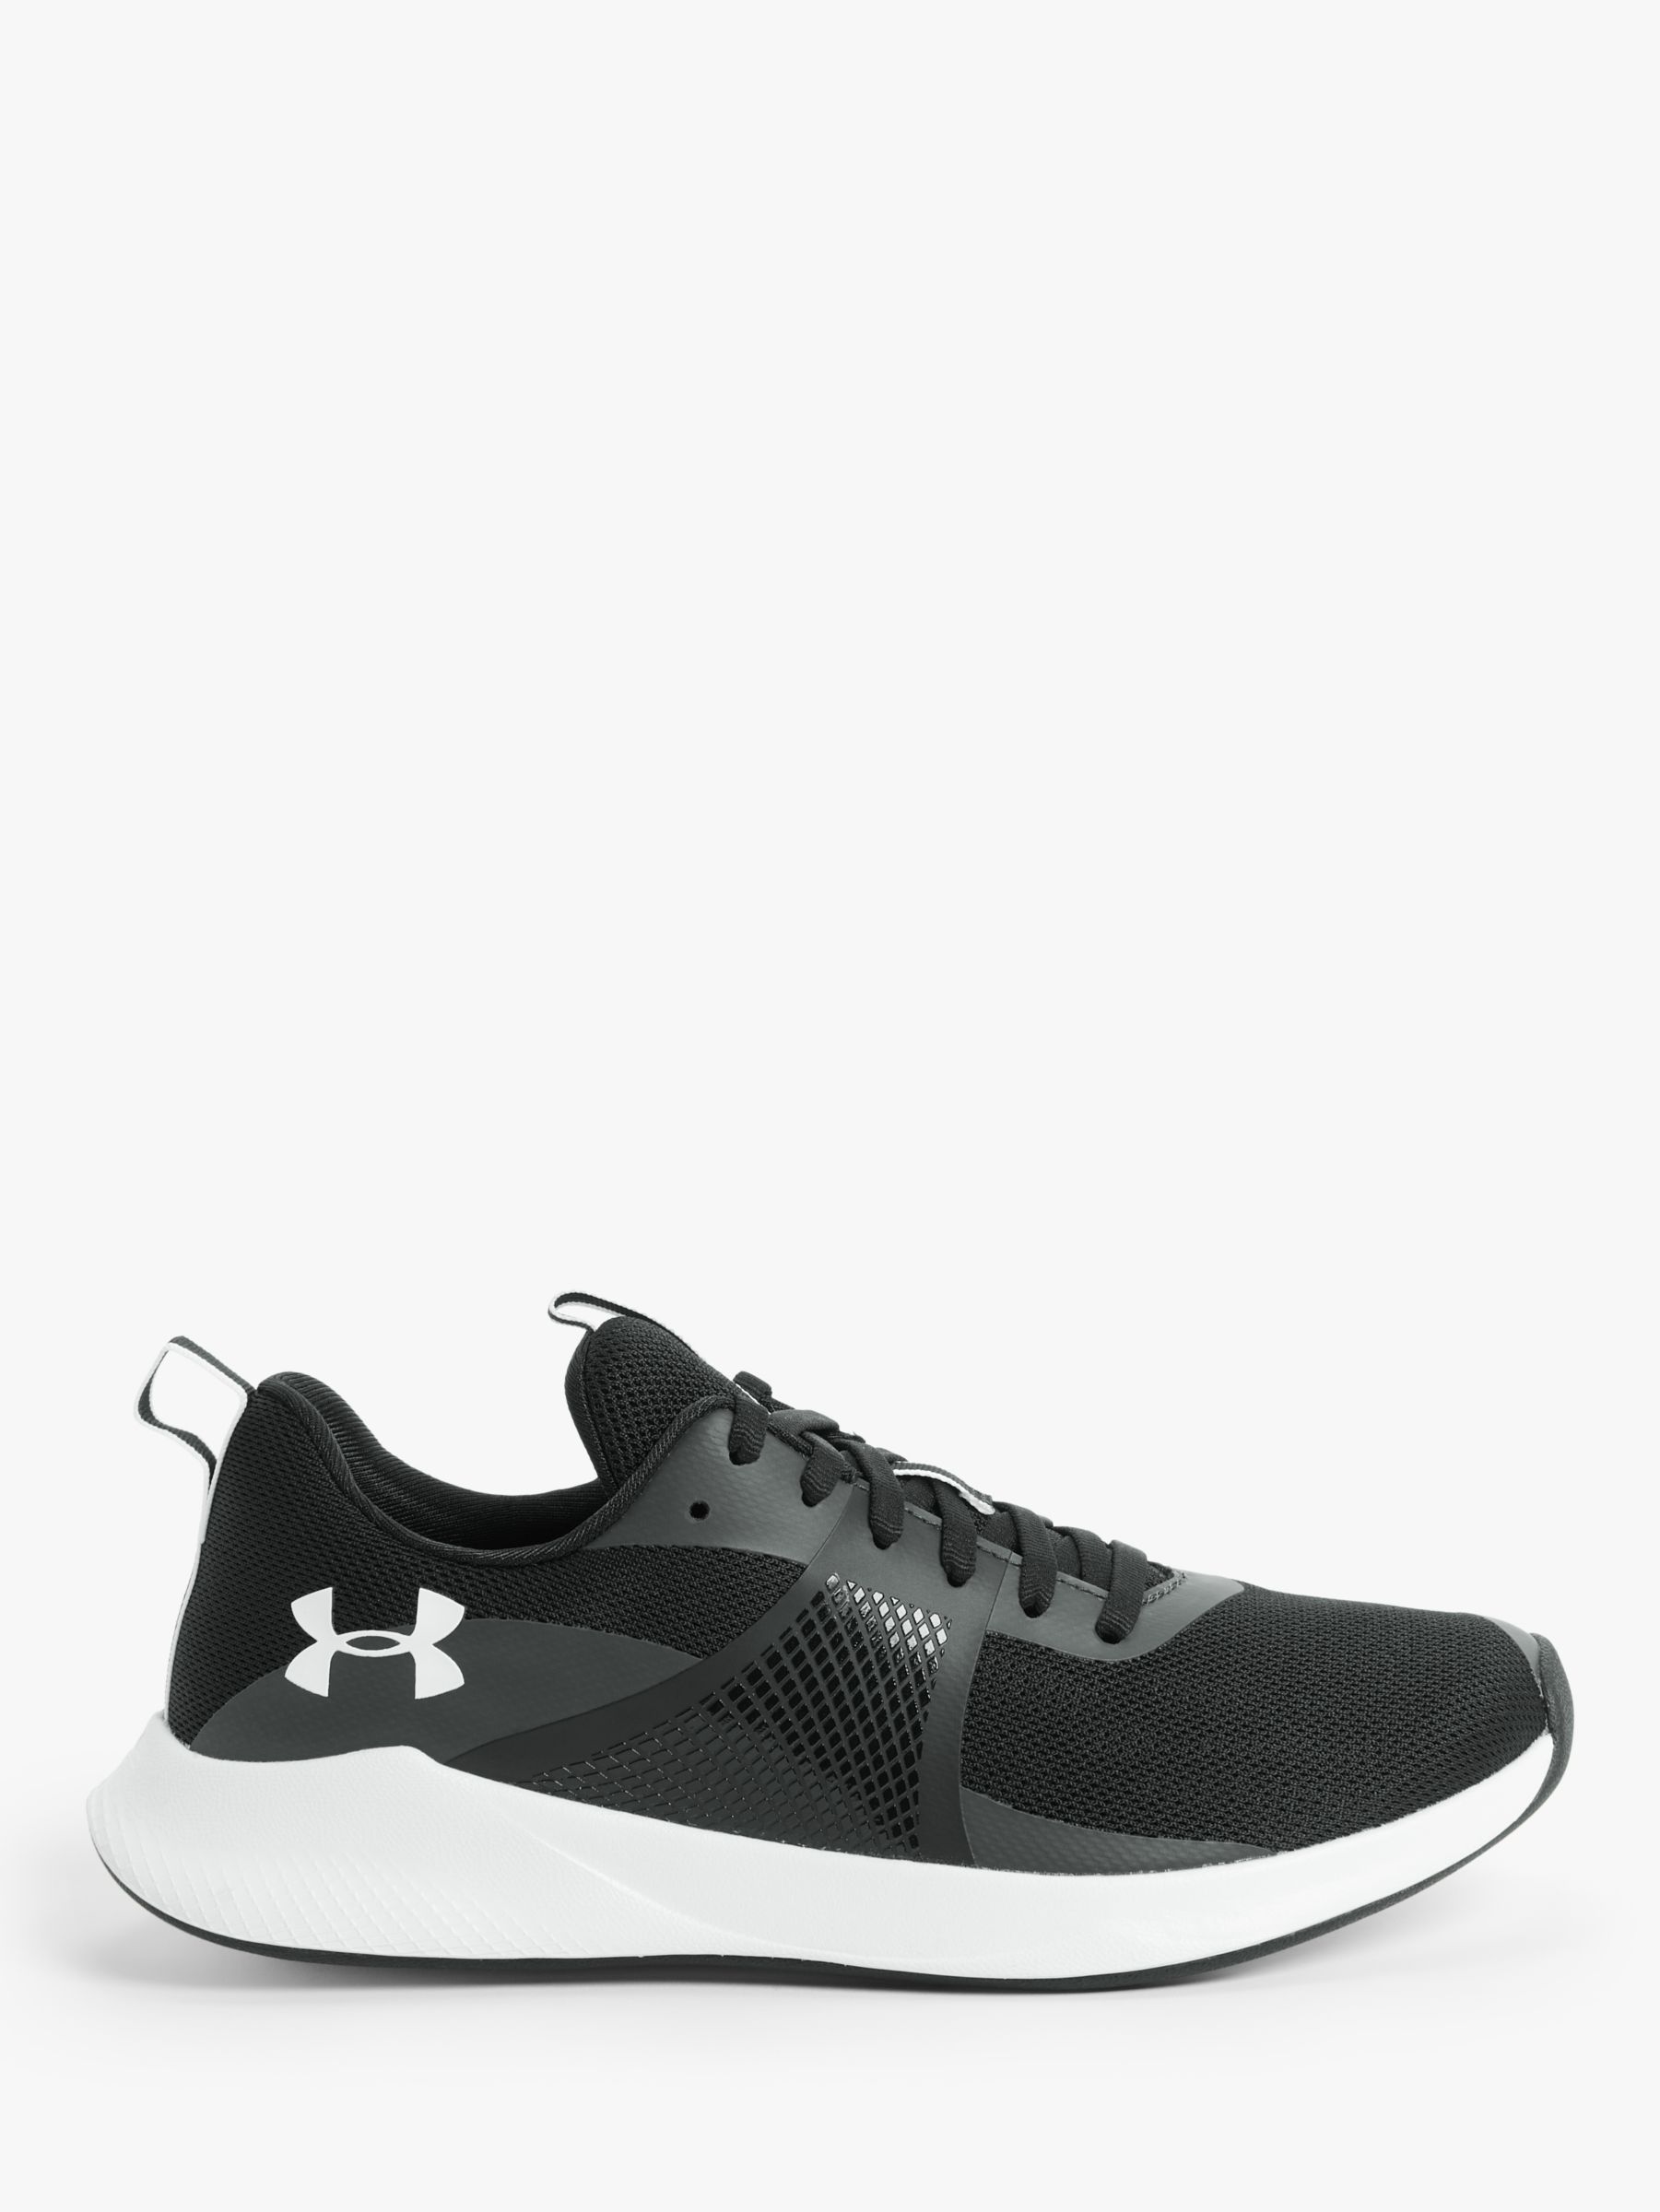 Under Armour Charged Aurora Women's Cross Trainers